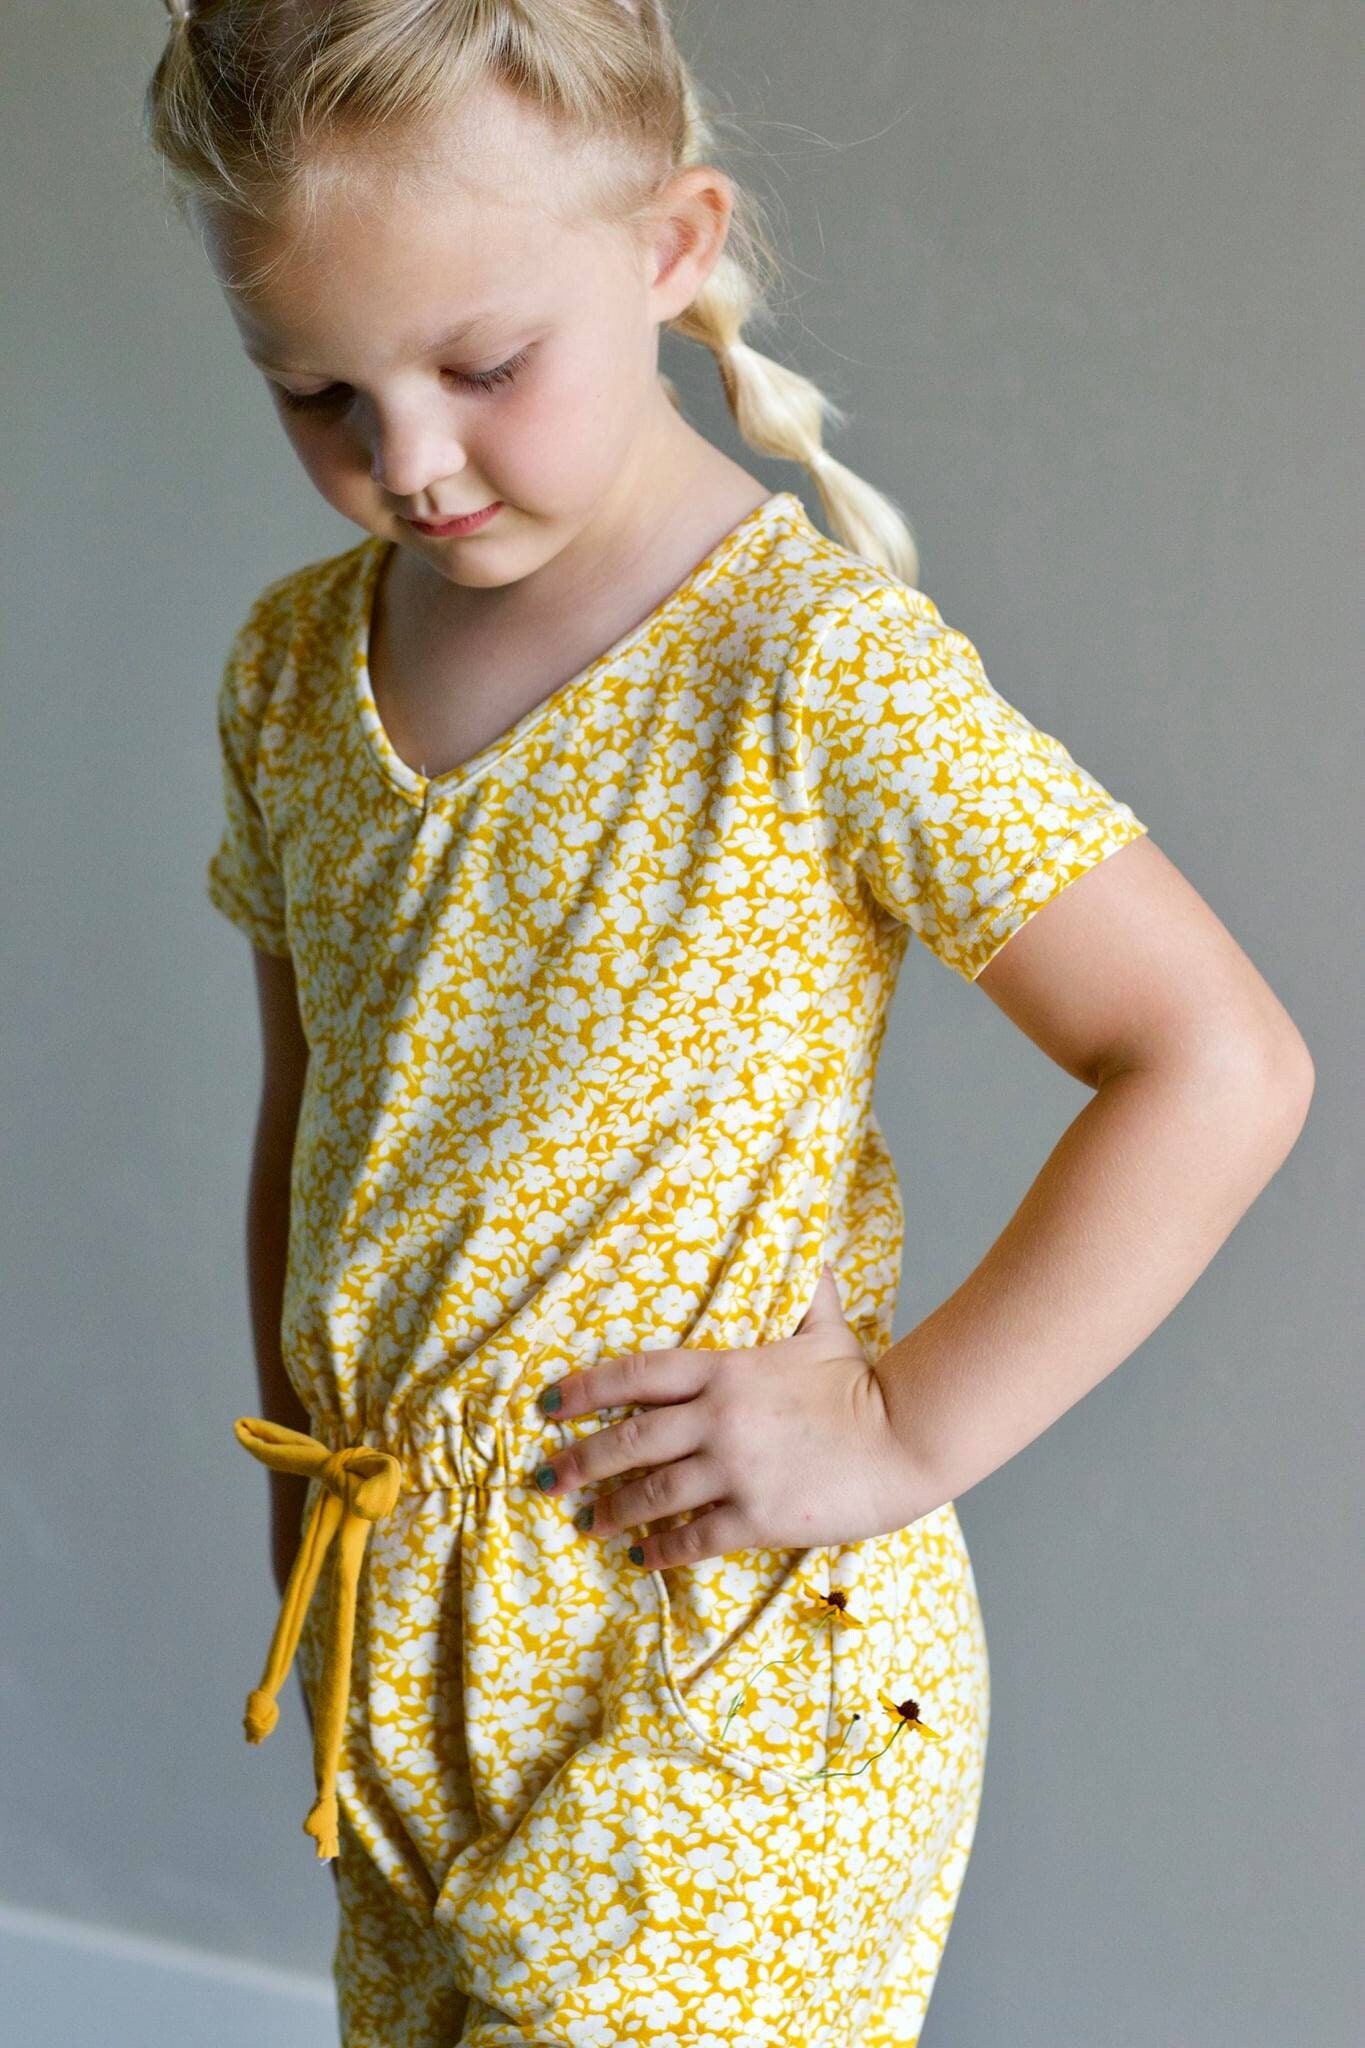 Curly hair girl dress fabric panel | Stretch cotton spandex jersey for  sewing unique summer tshirt | Yellow teenager girl gift ideas